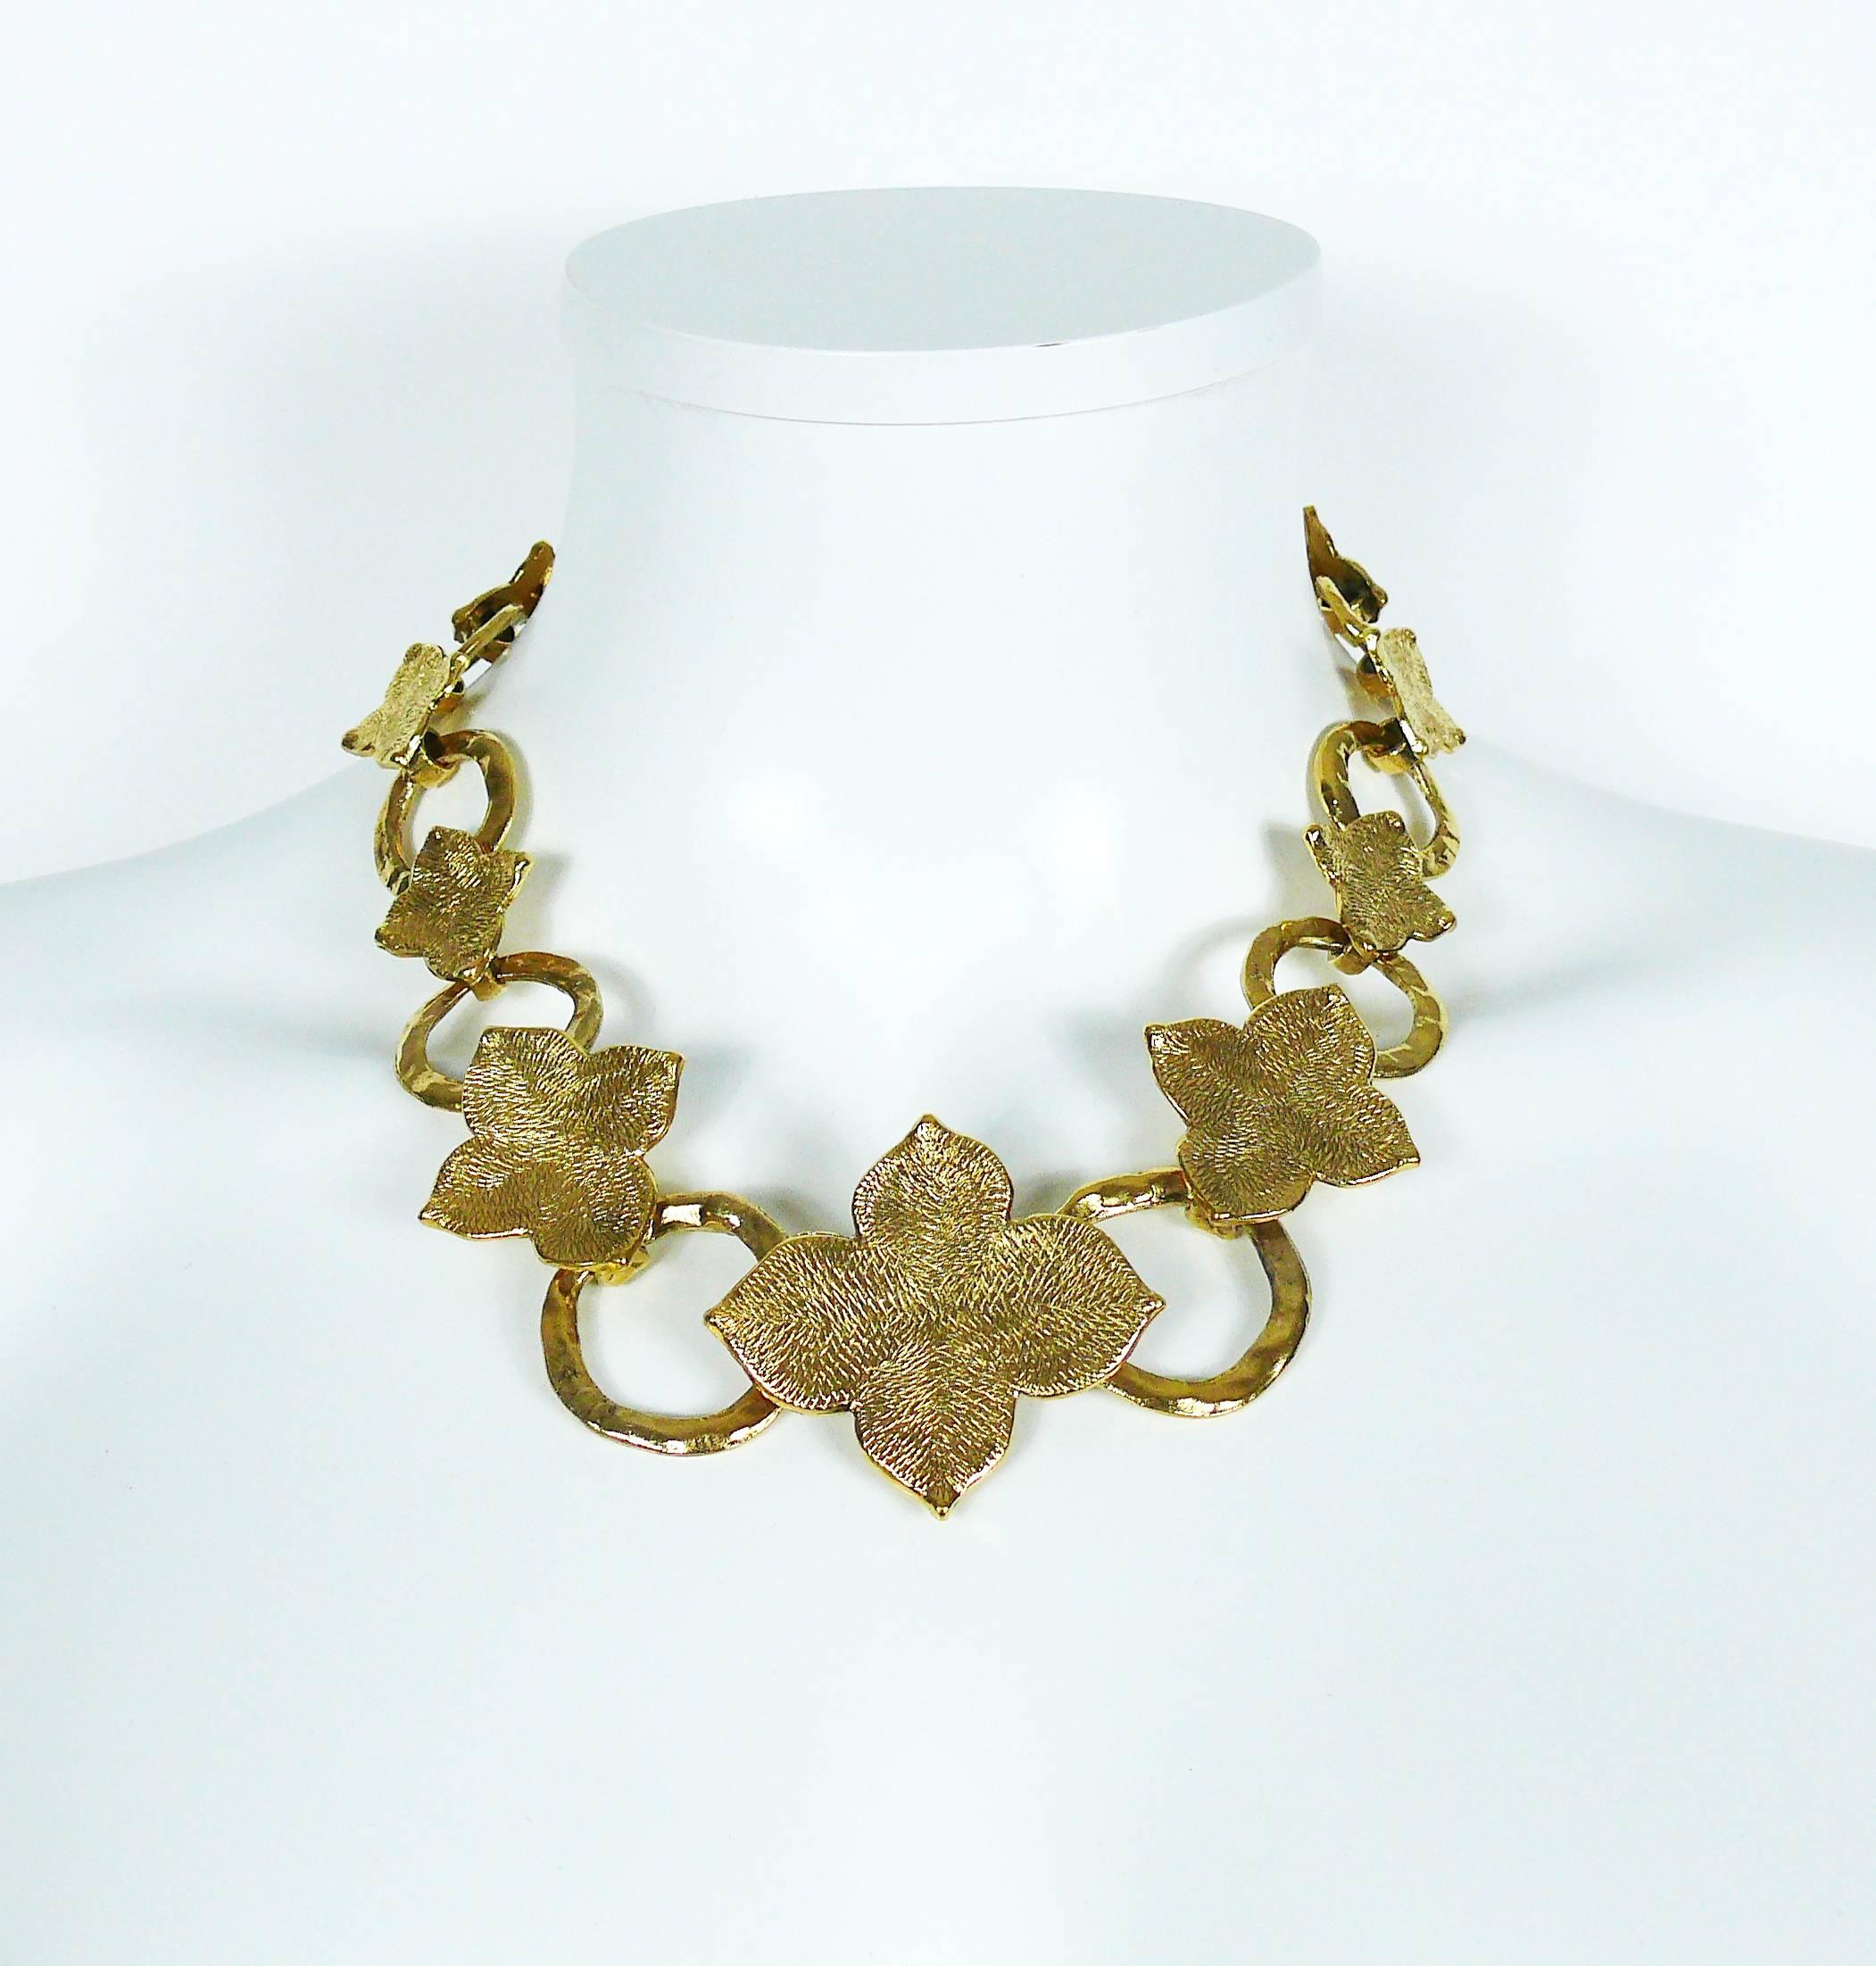 YVES SAINT LAURENT vintage necklace featuring chunky hammered rings embellished with graduated and textured abstract flowers.

T-bar closure.

Embossed YVES SAINT LAURENT on the clasp.

Indicative measurements : total length approx. 49 cm (19.29